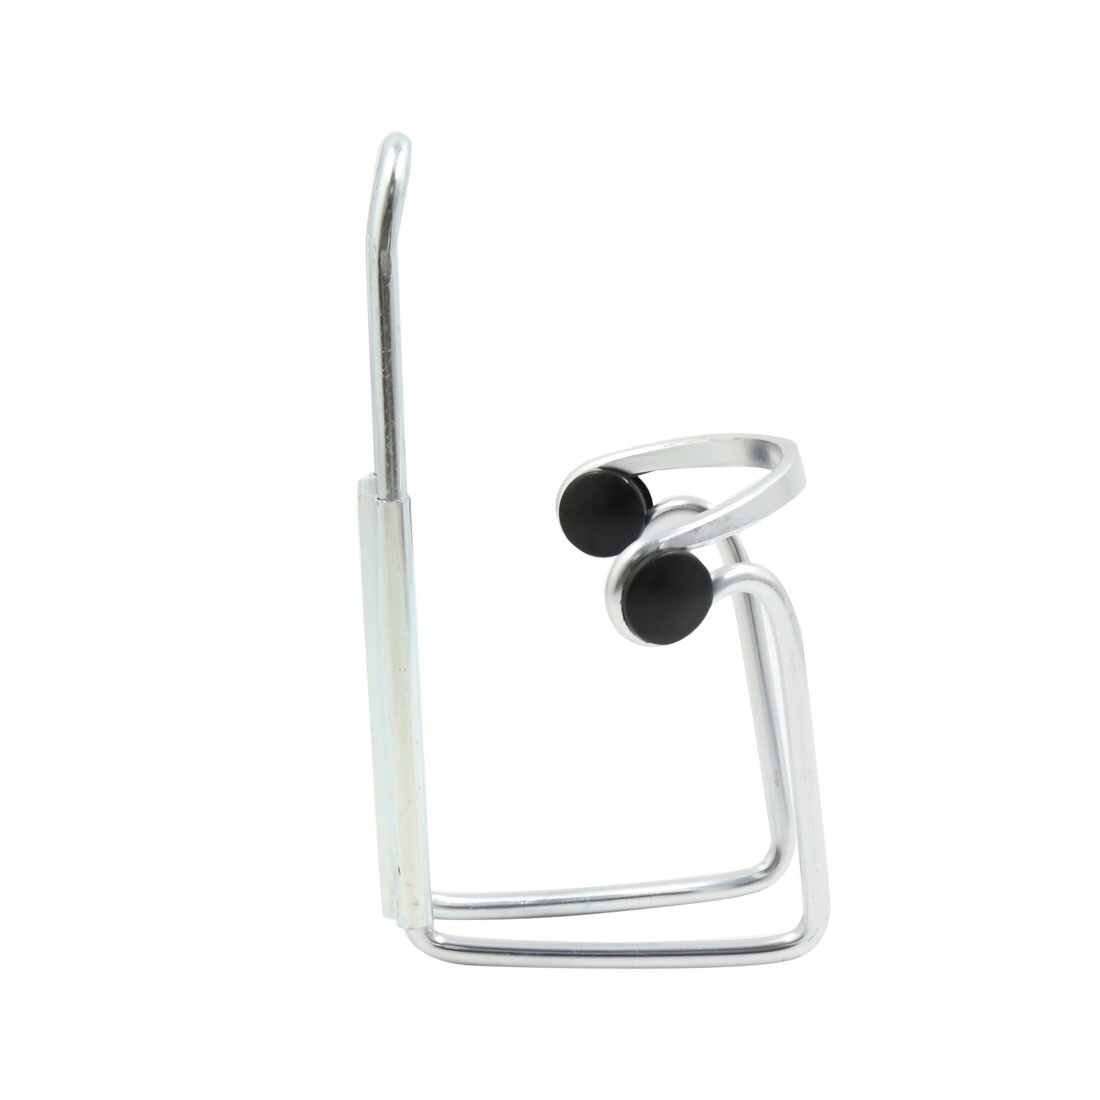 Aluminum Alloy Bicycle Bike Handlebar Mount Water Cup Bottle Cage Clamp Holder #